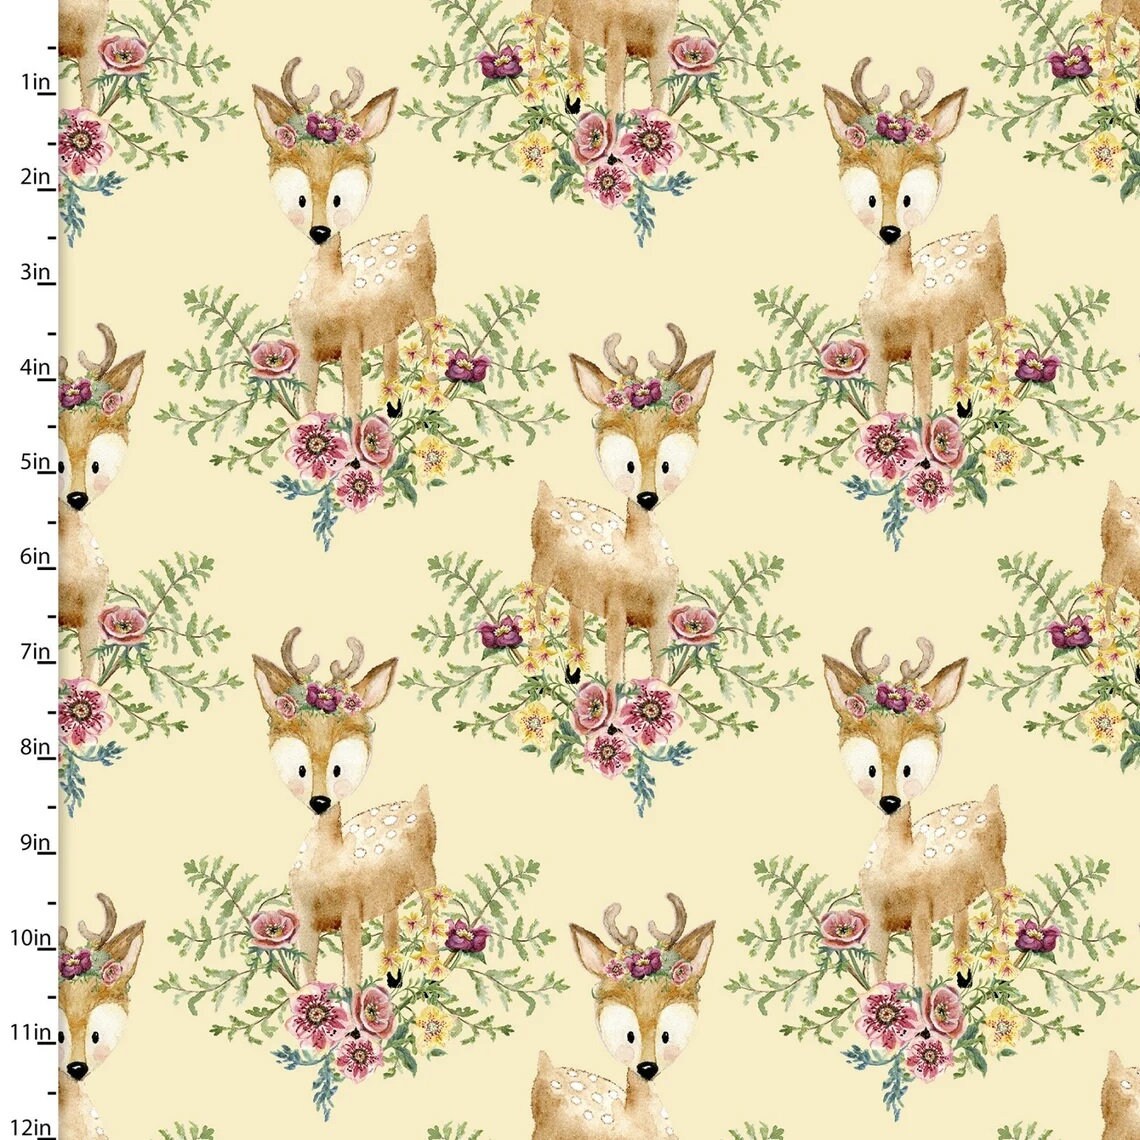 LAST PIECE CARTOON DEER WITH FLOWERS & FERNS 18" x 44" cotton fabric 3 WISHES!